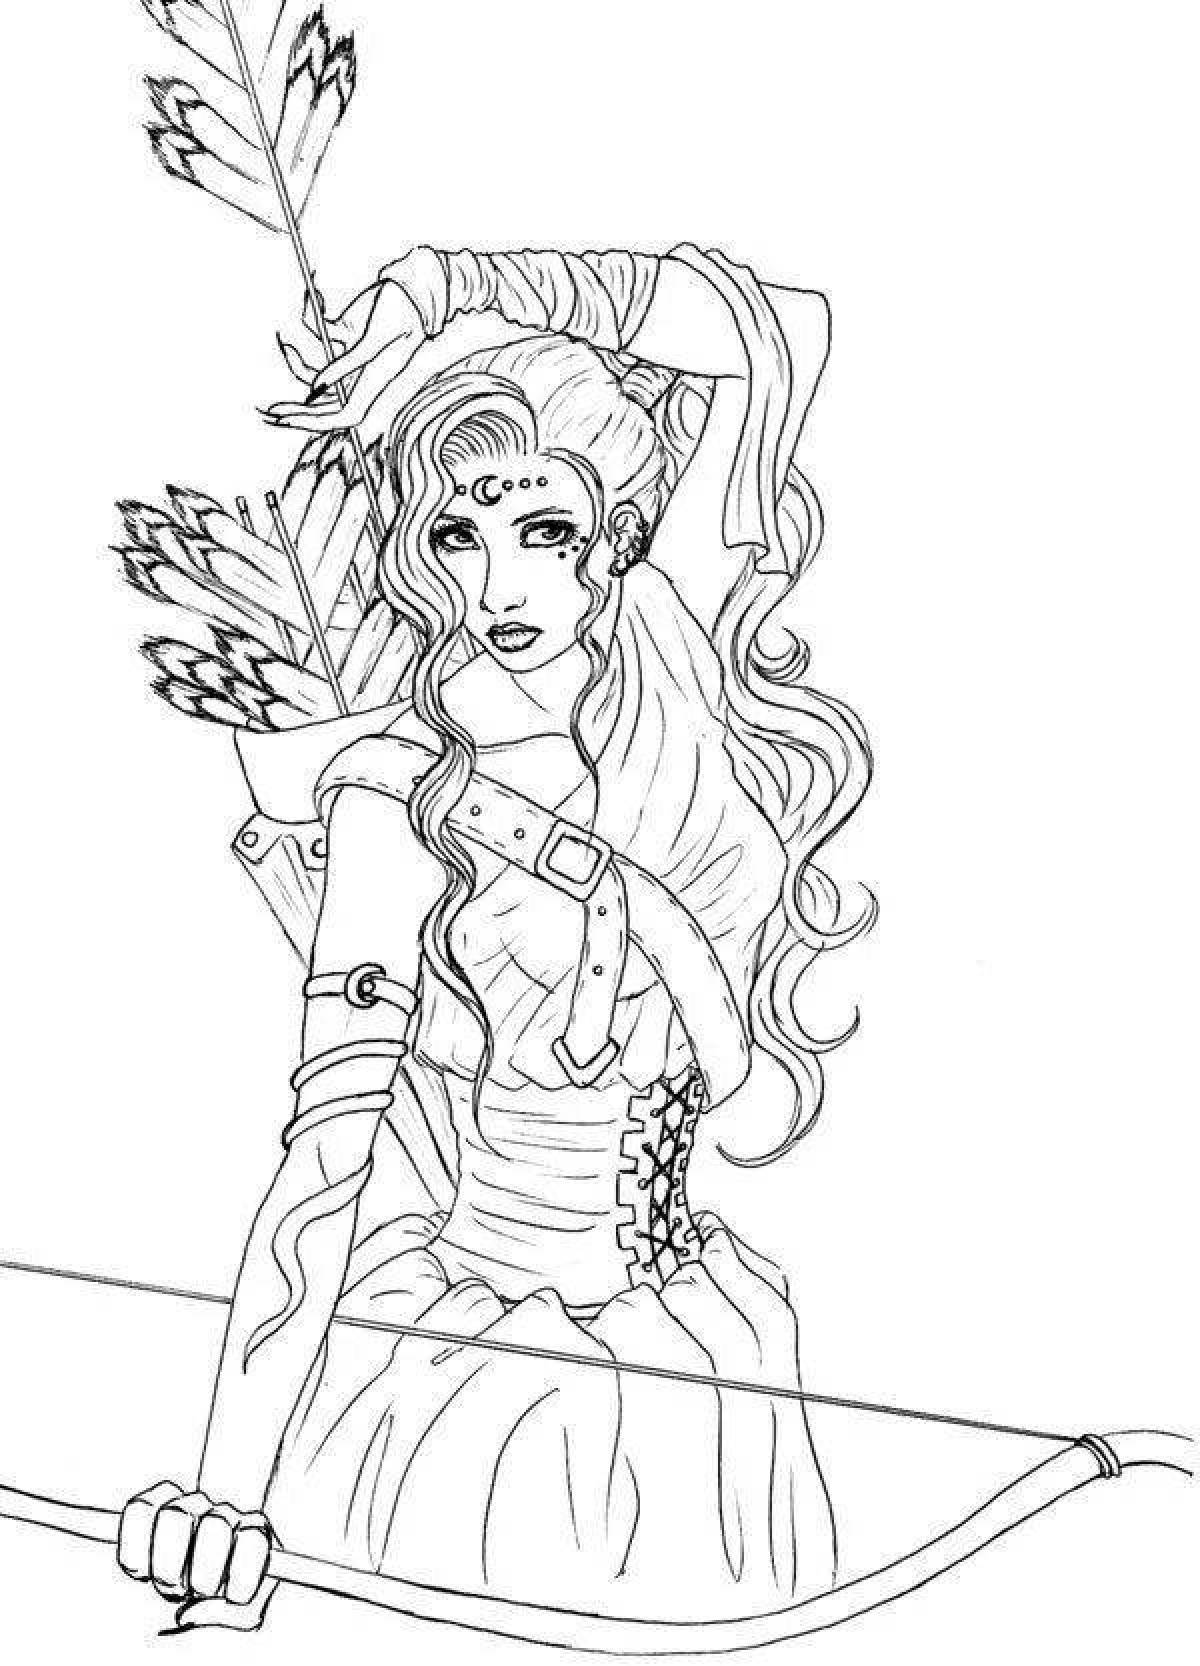 Awesome artemis coloring book